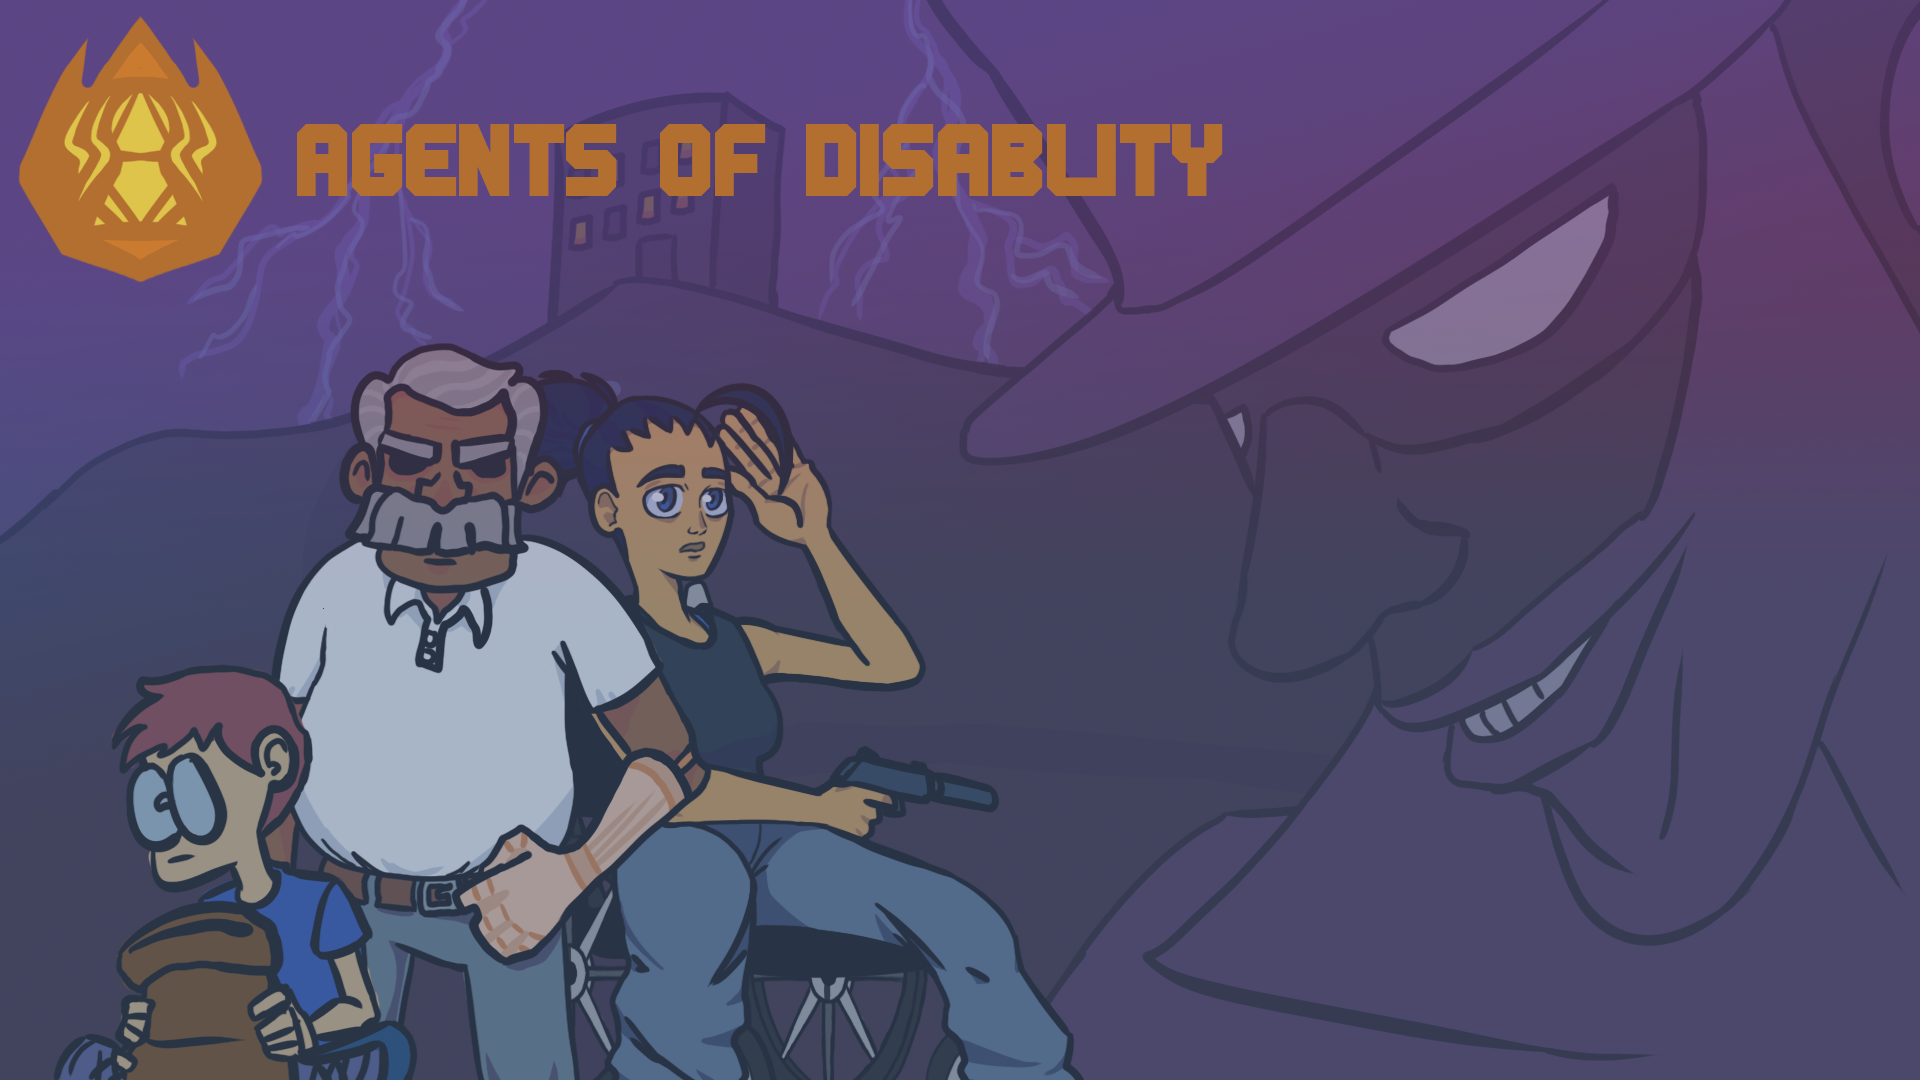 Agents of Disability